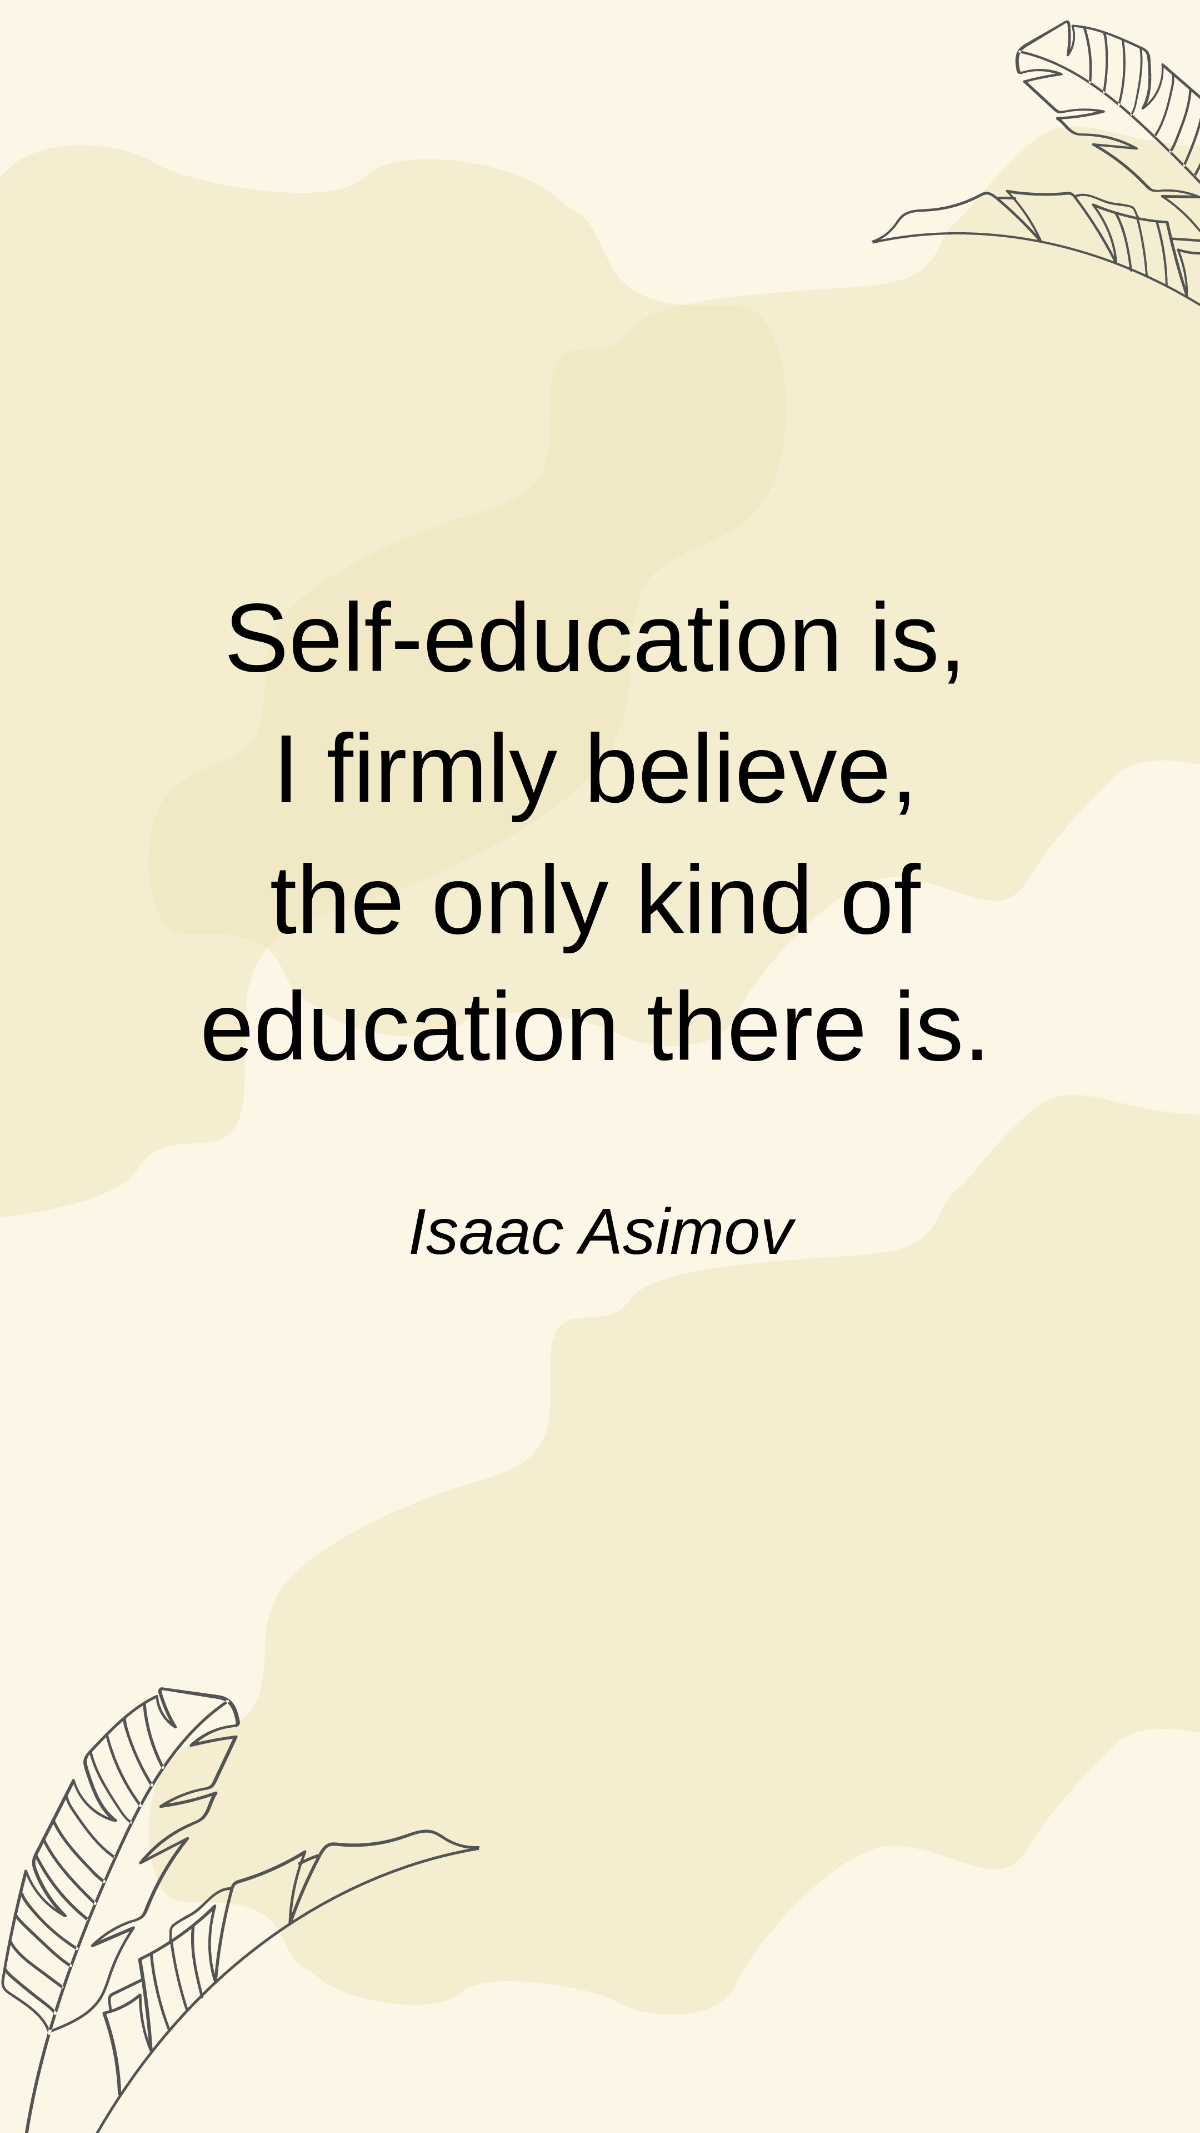 Isaac Asimov - Self-education is, I firmly believe, the only kind of education there is. Template